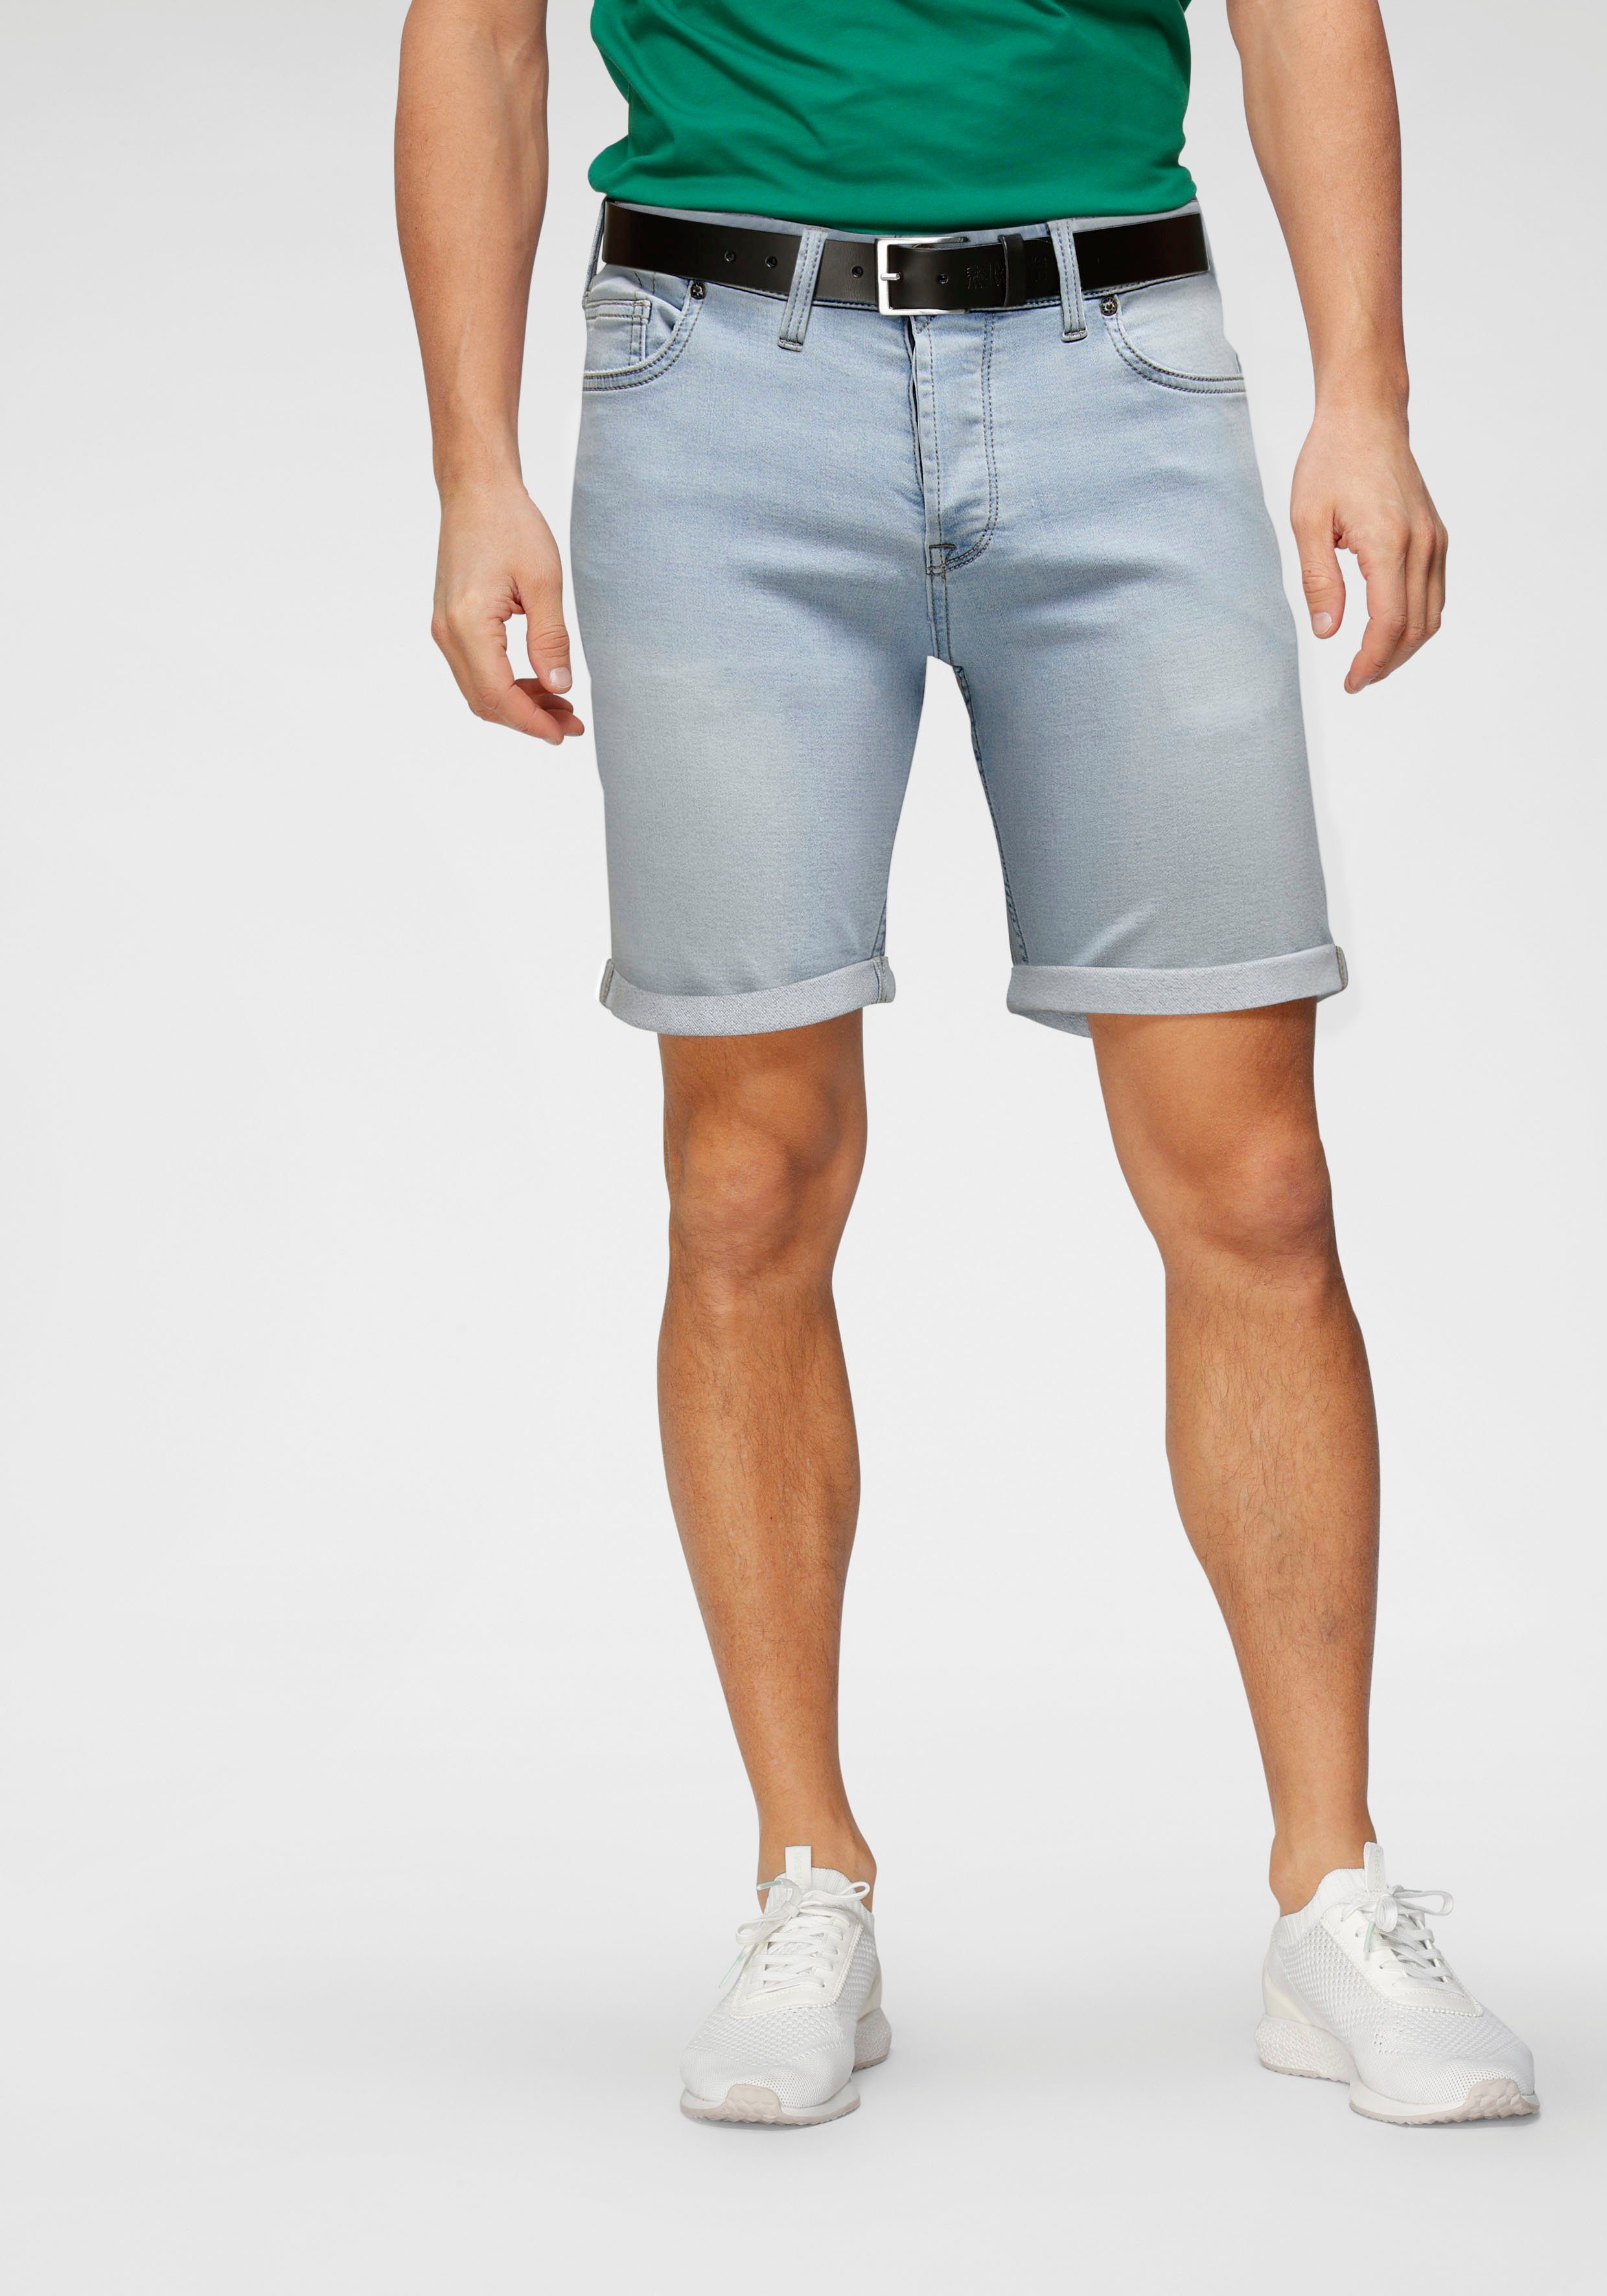 ONLY & SONS Jeansshorts ONSPLY LIGHT BLUE 5189 SHORTS DNM NOOS blue Denim